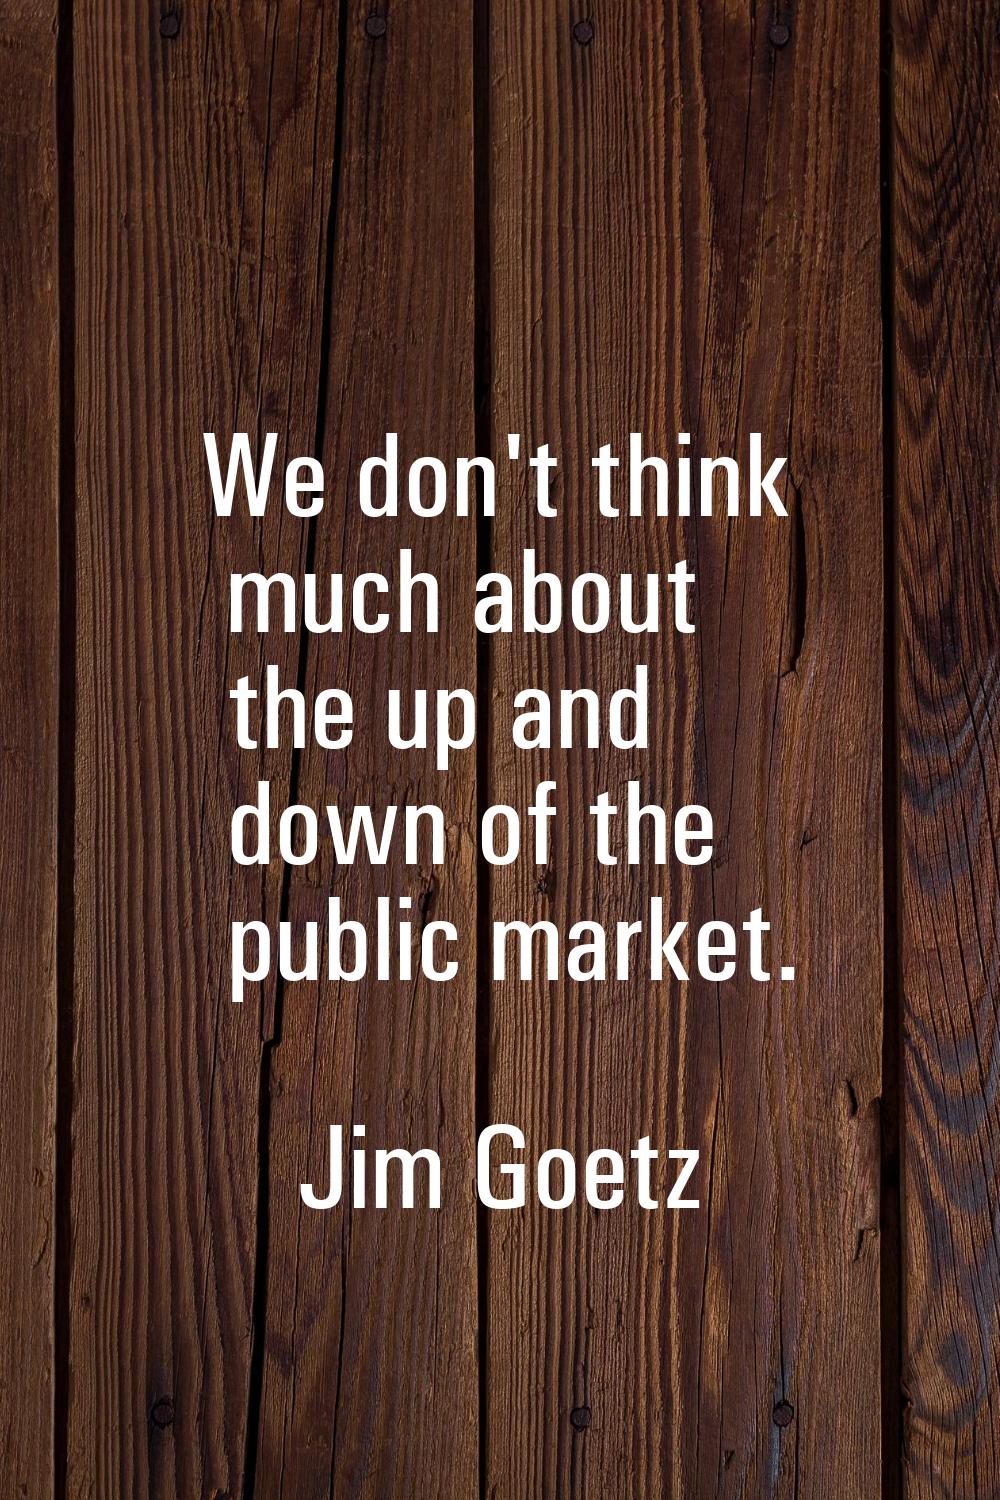 We don't think much about the up and down of the public market.